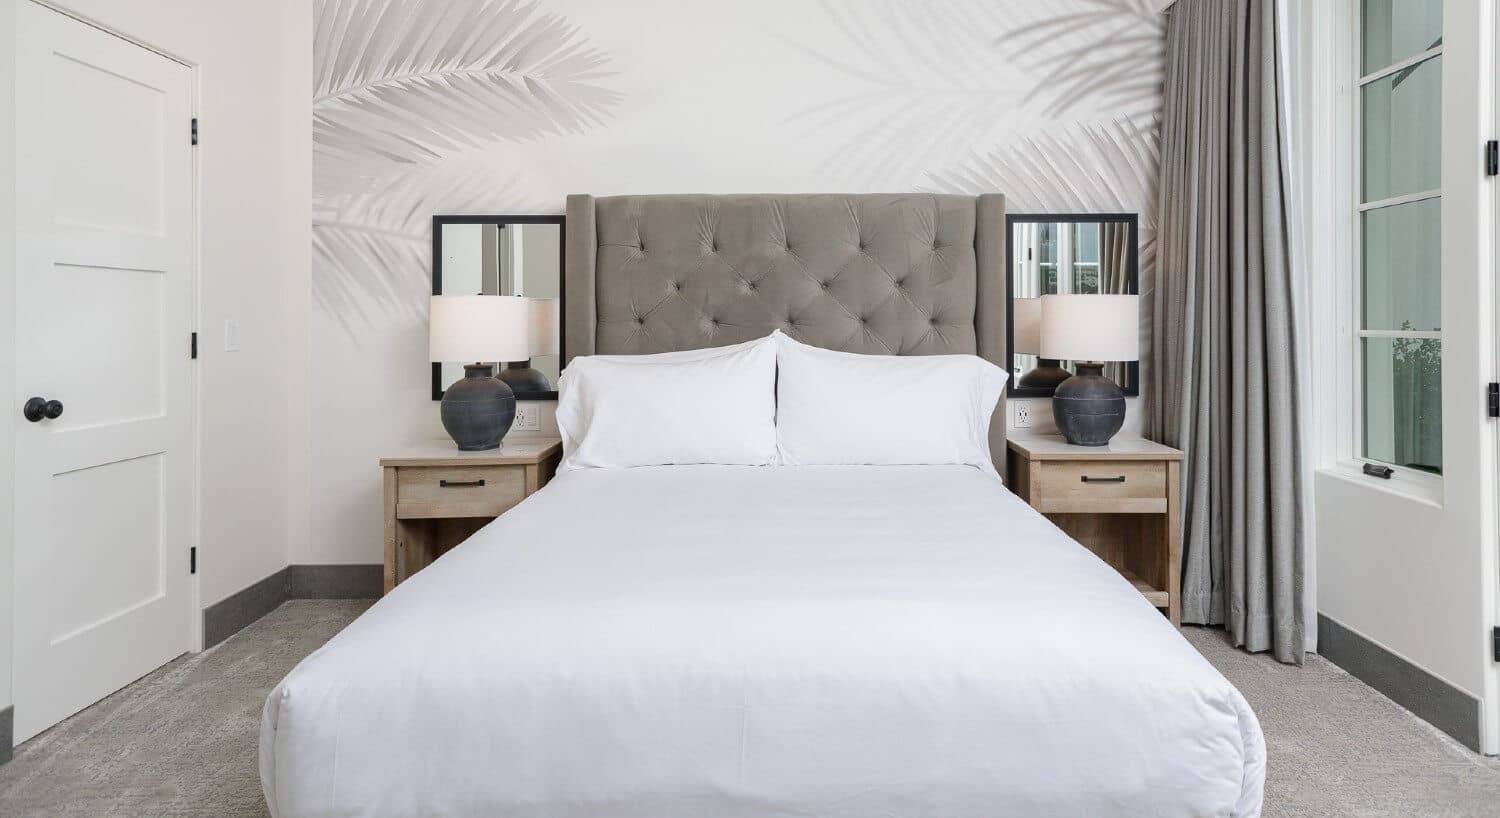 King bed with large tufted headboard, side tables with lamps and mirrors and decorative wallpaper